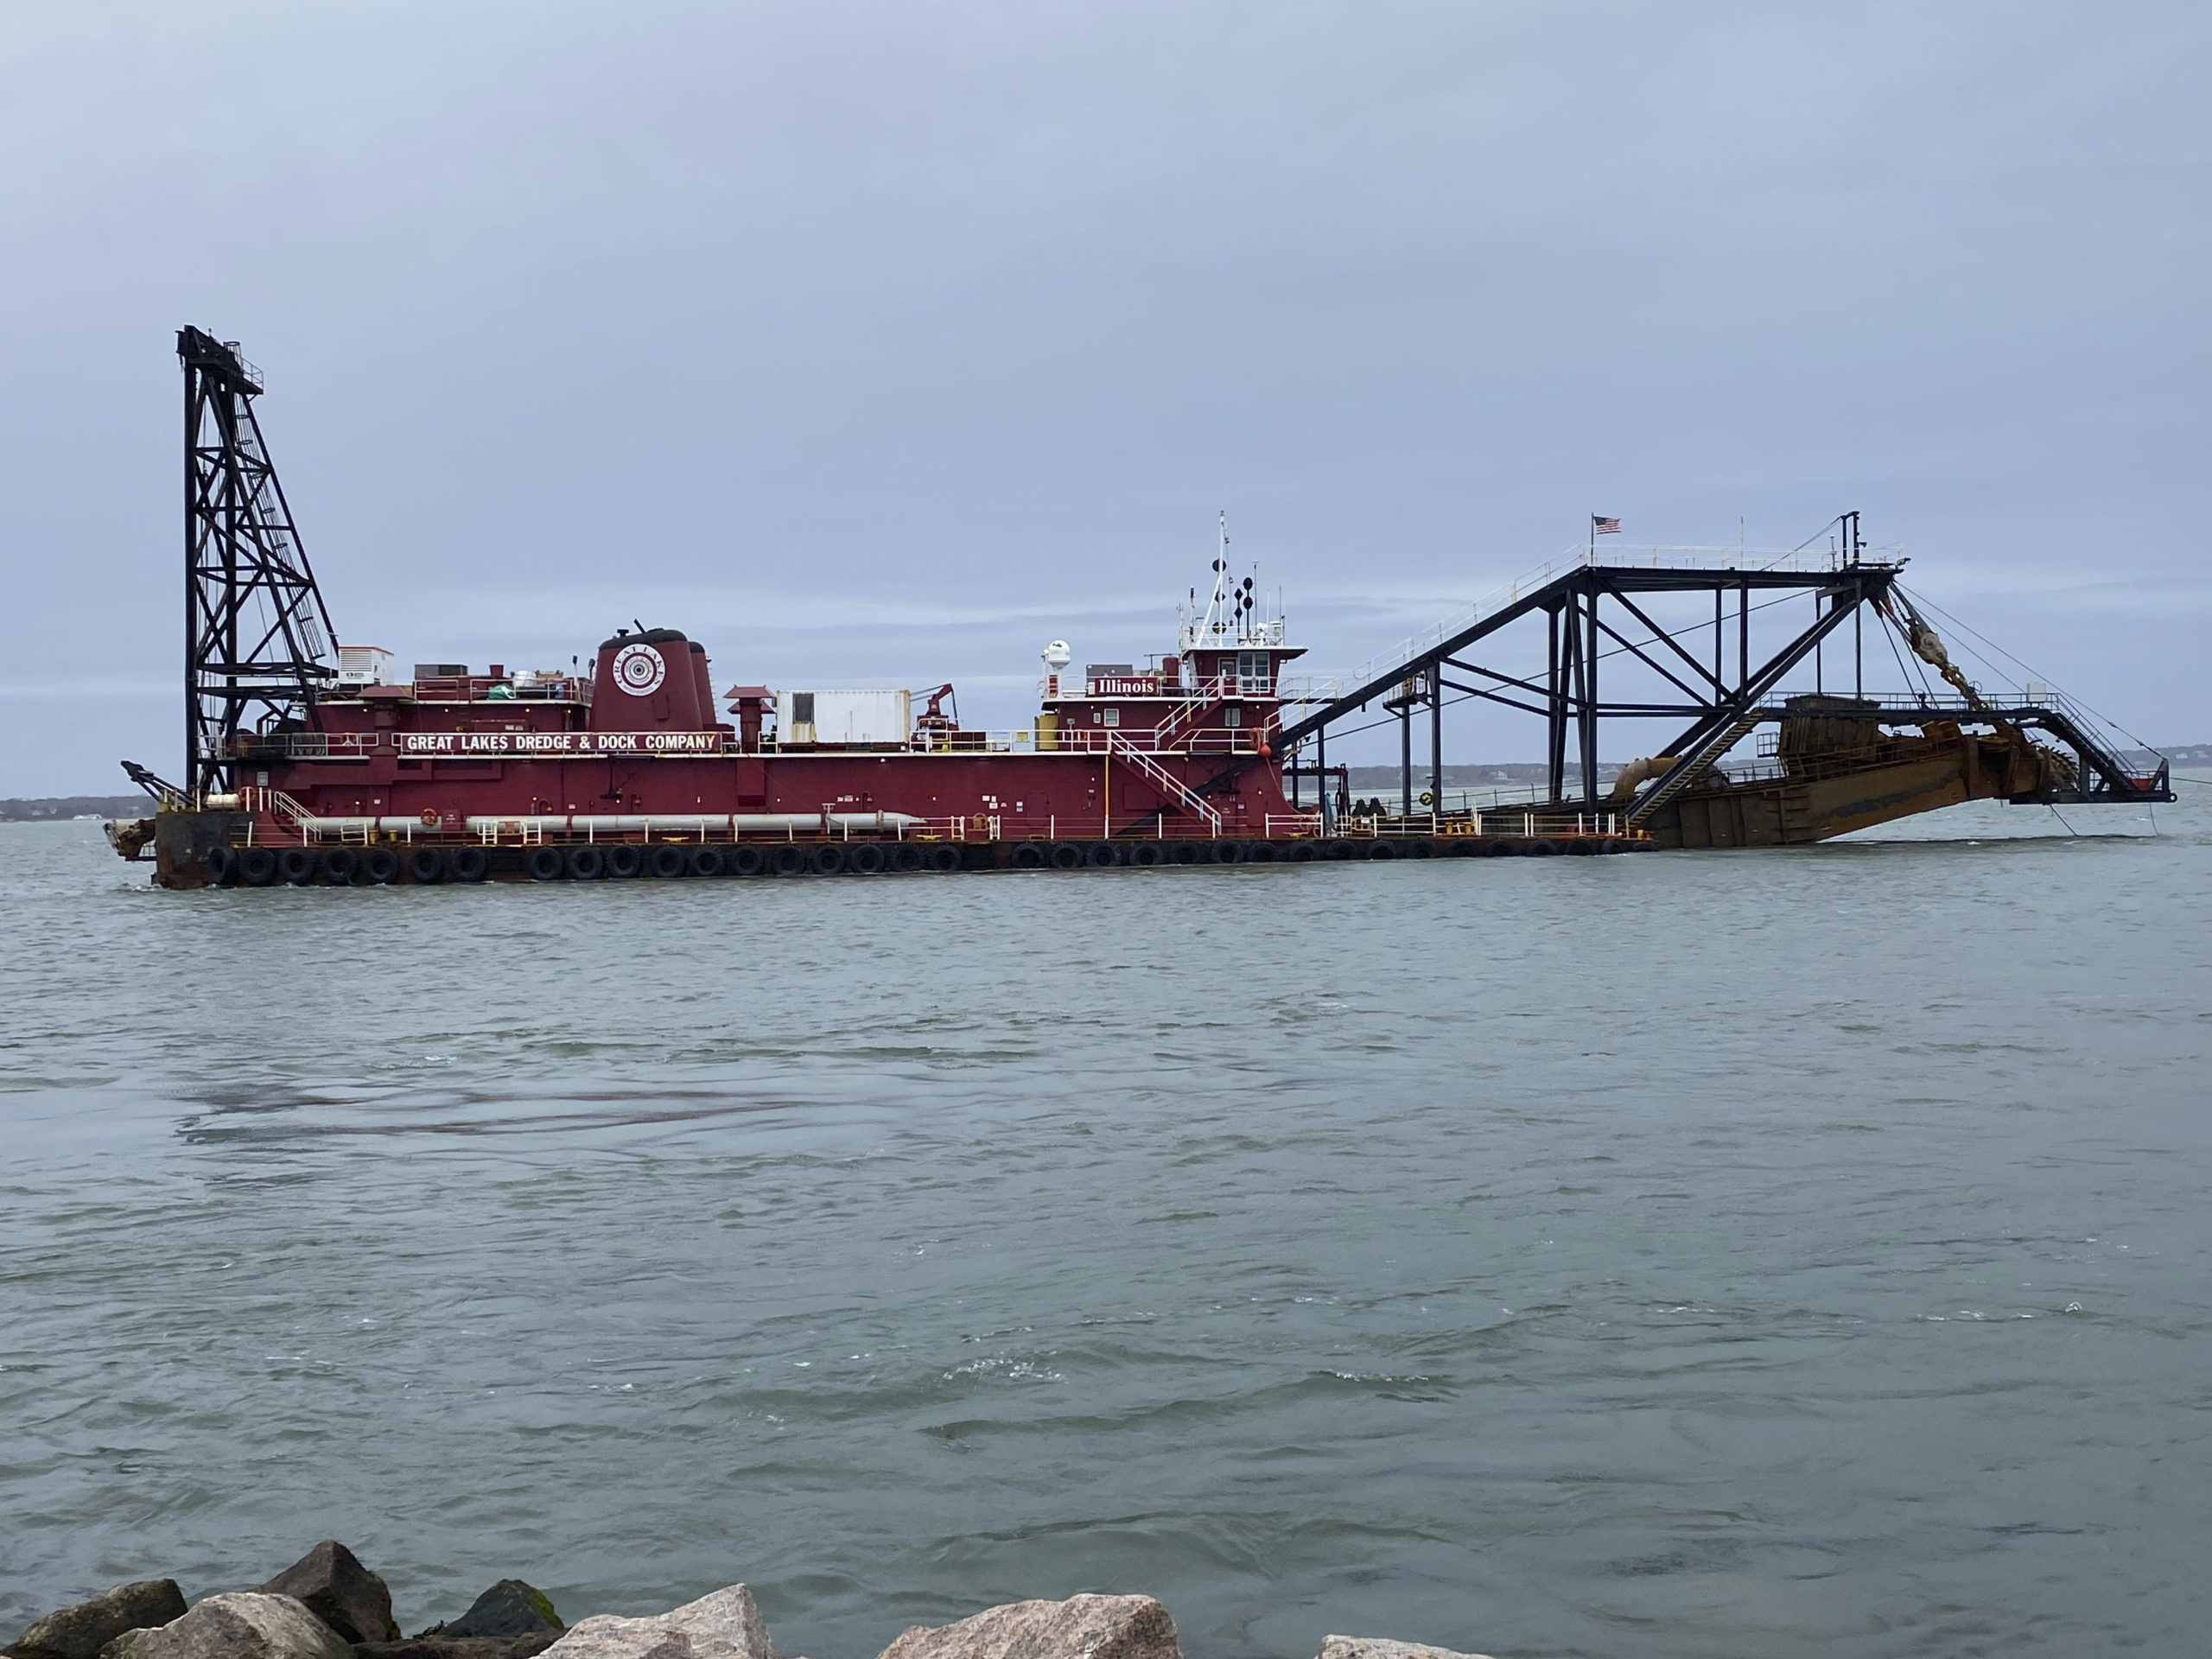 great lakes dredge & dock co